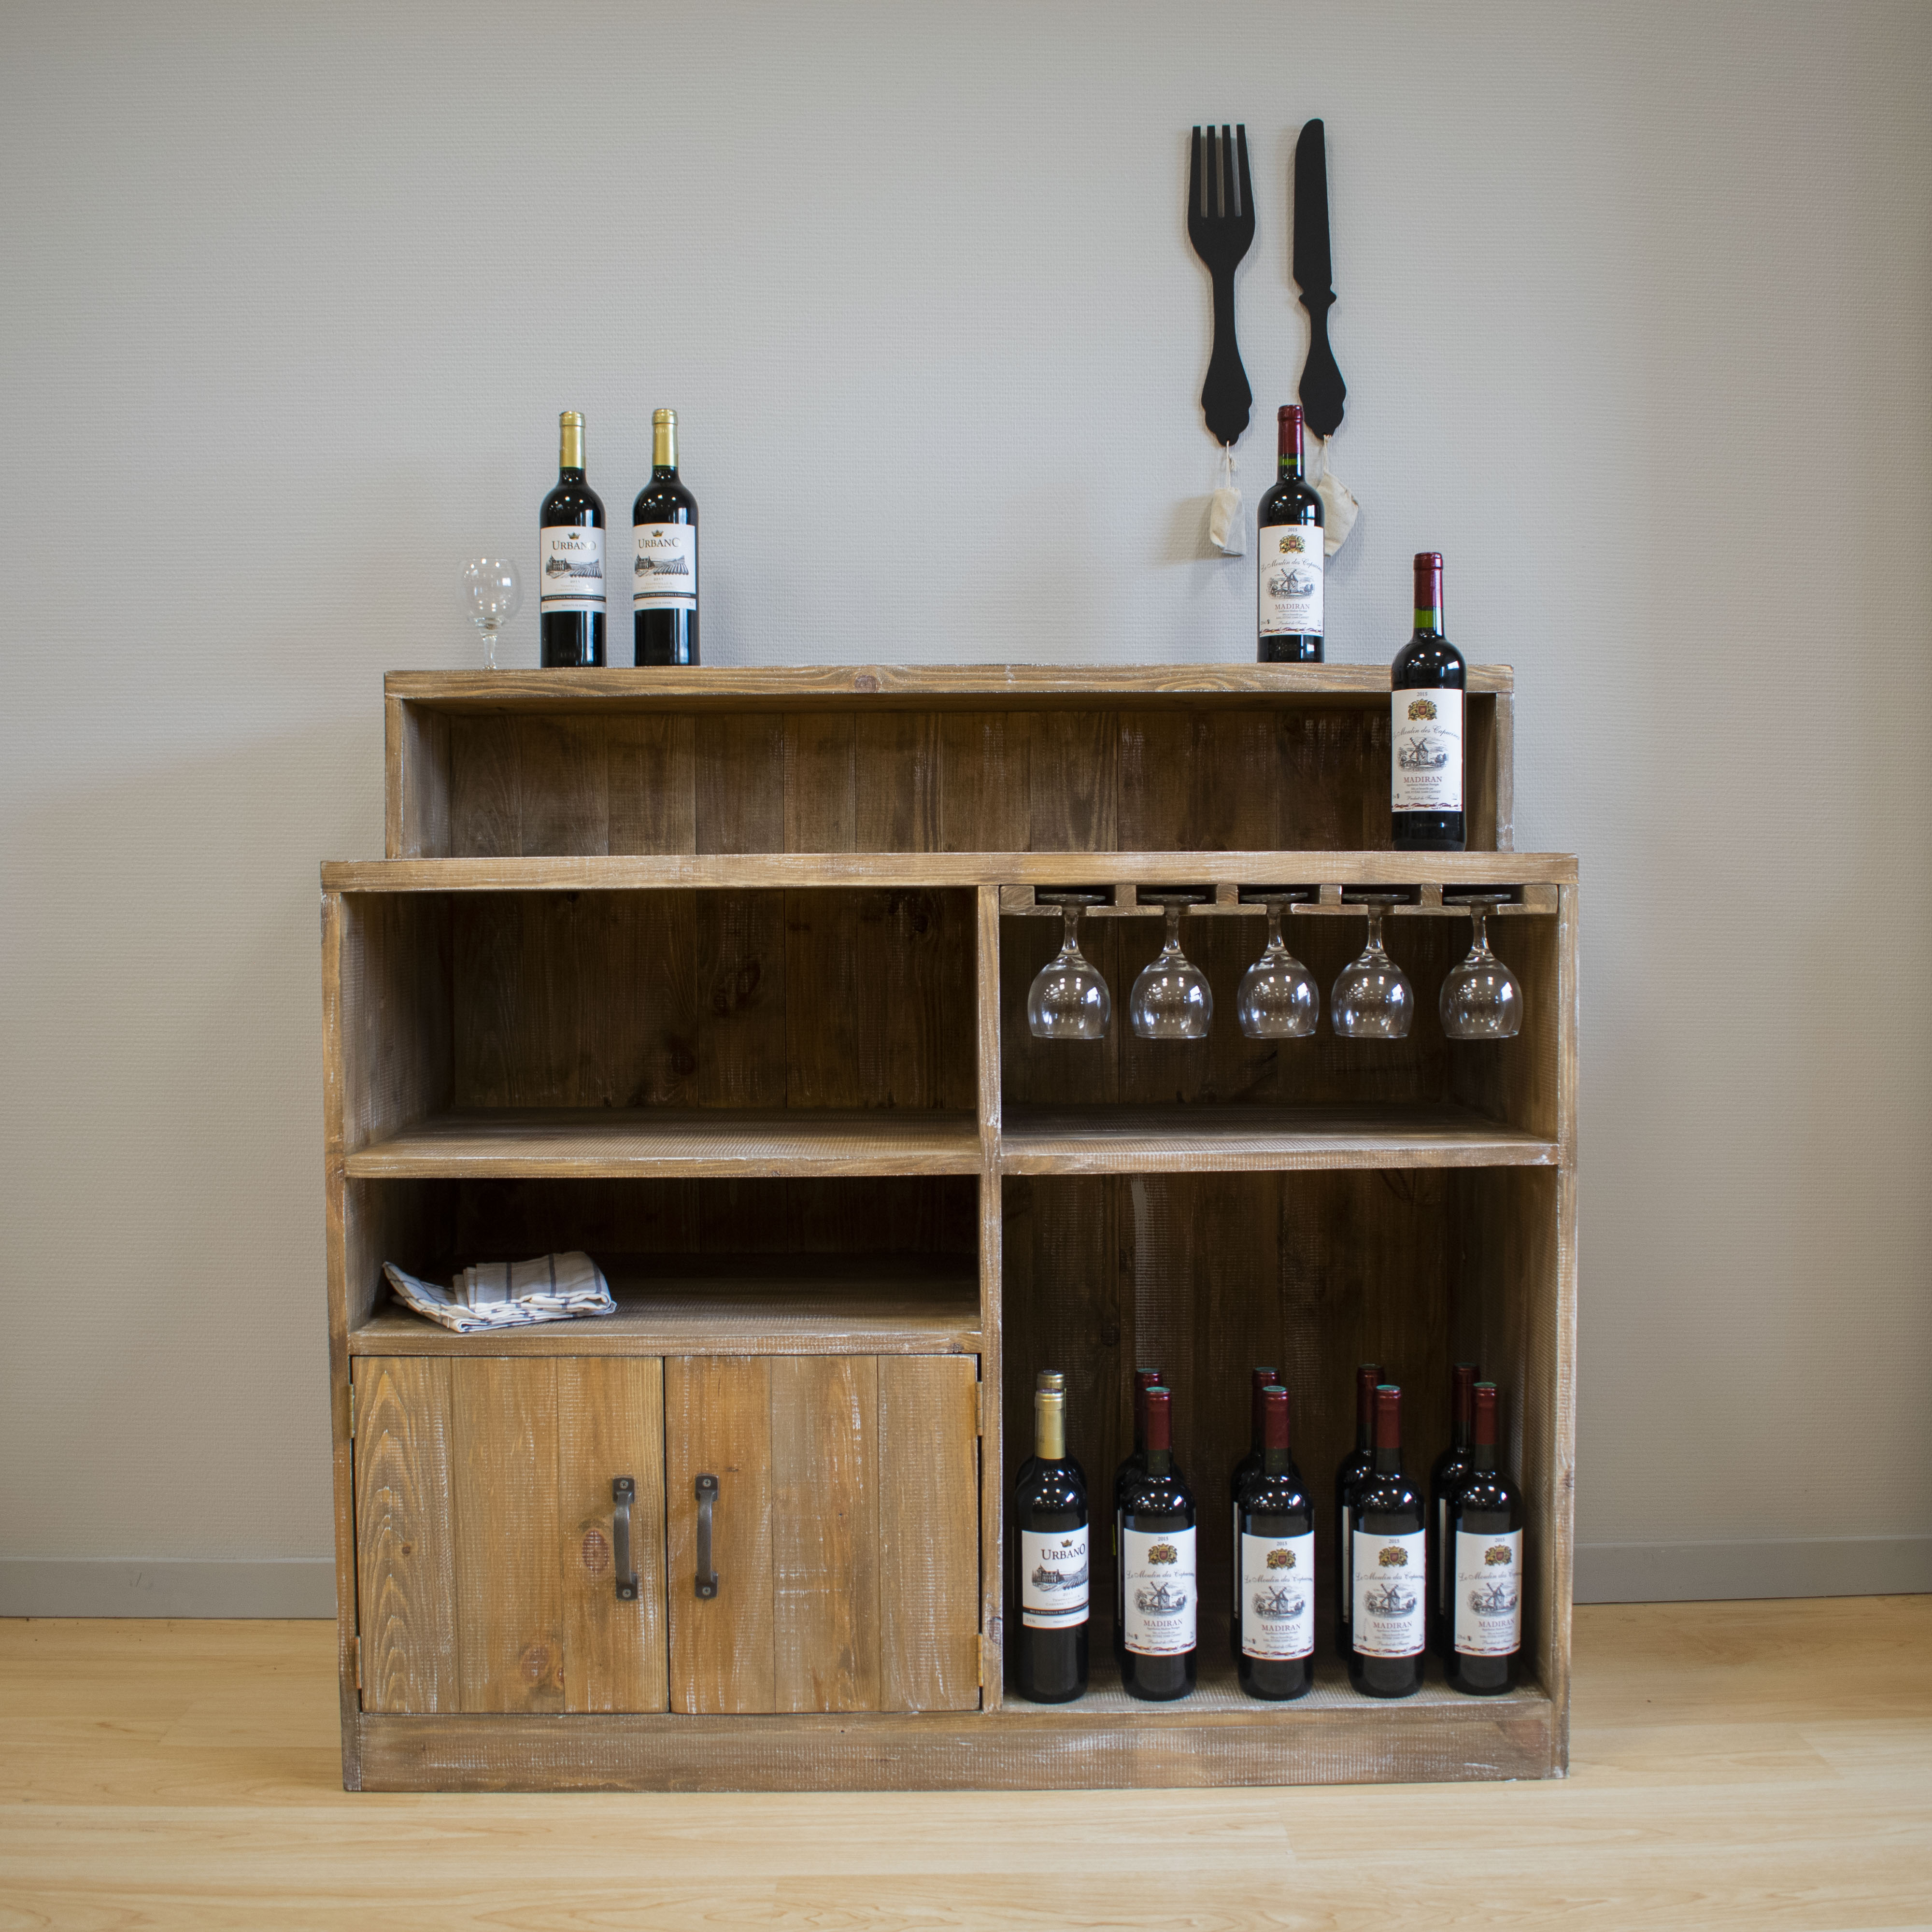 Our Ideas For Solid Wood Wine Bars For Wine Shops | Tradis